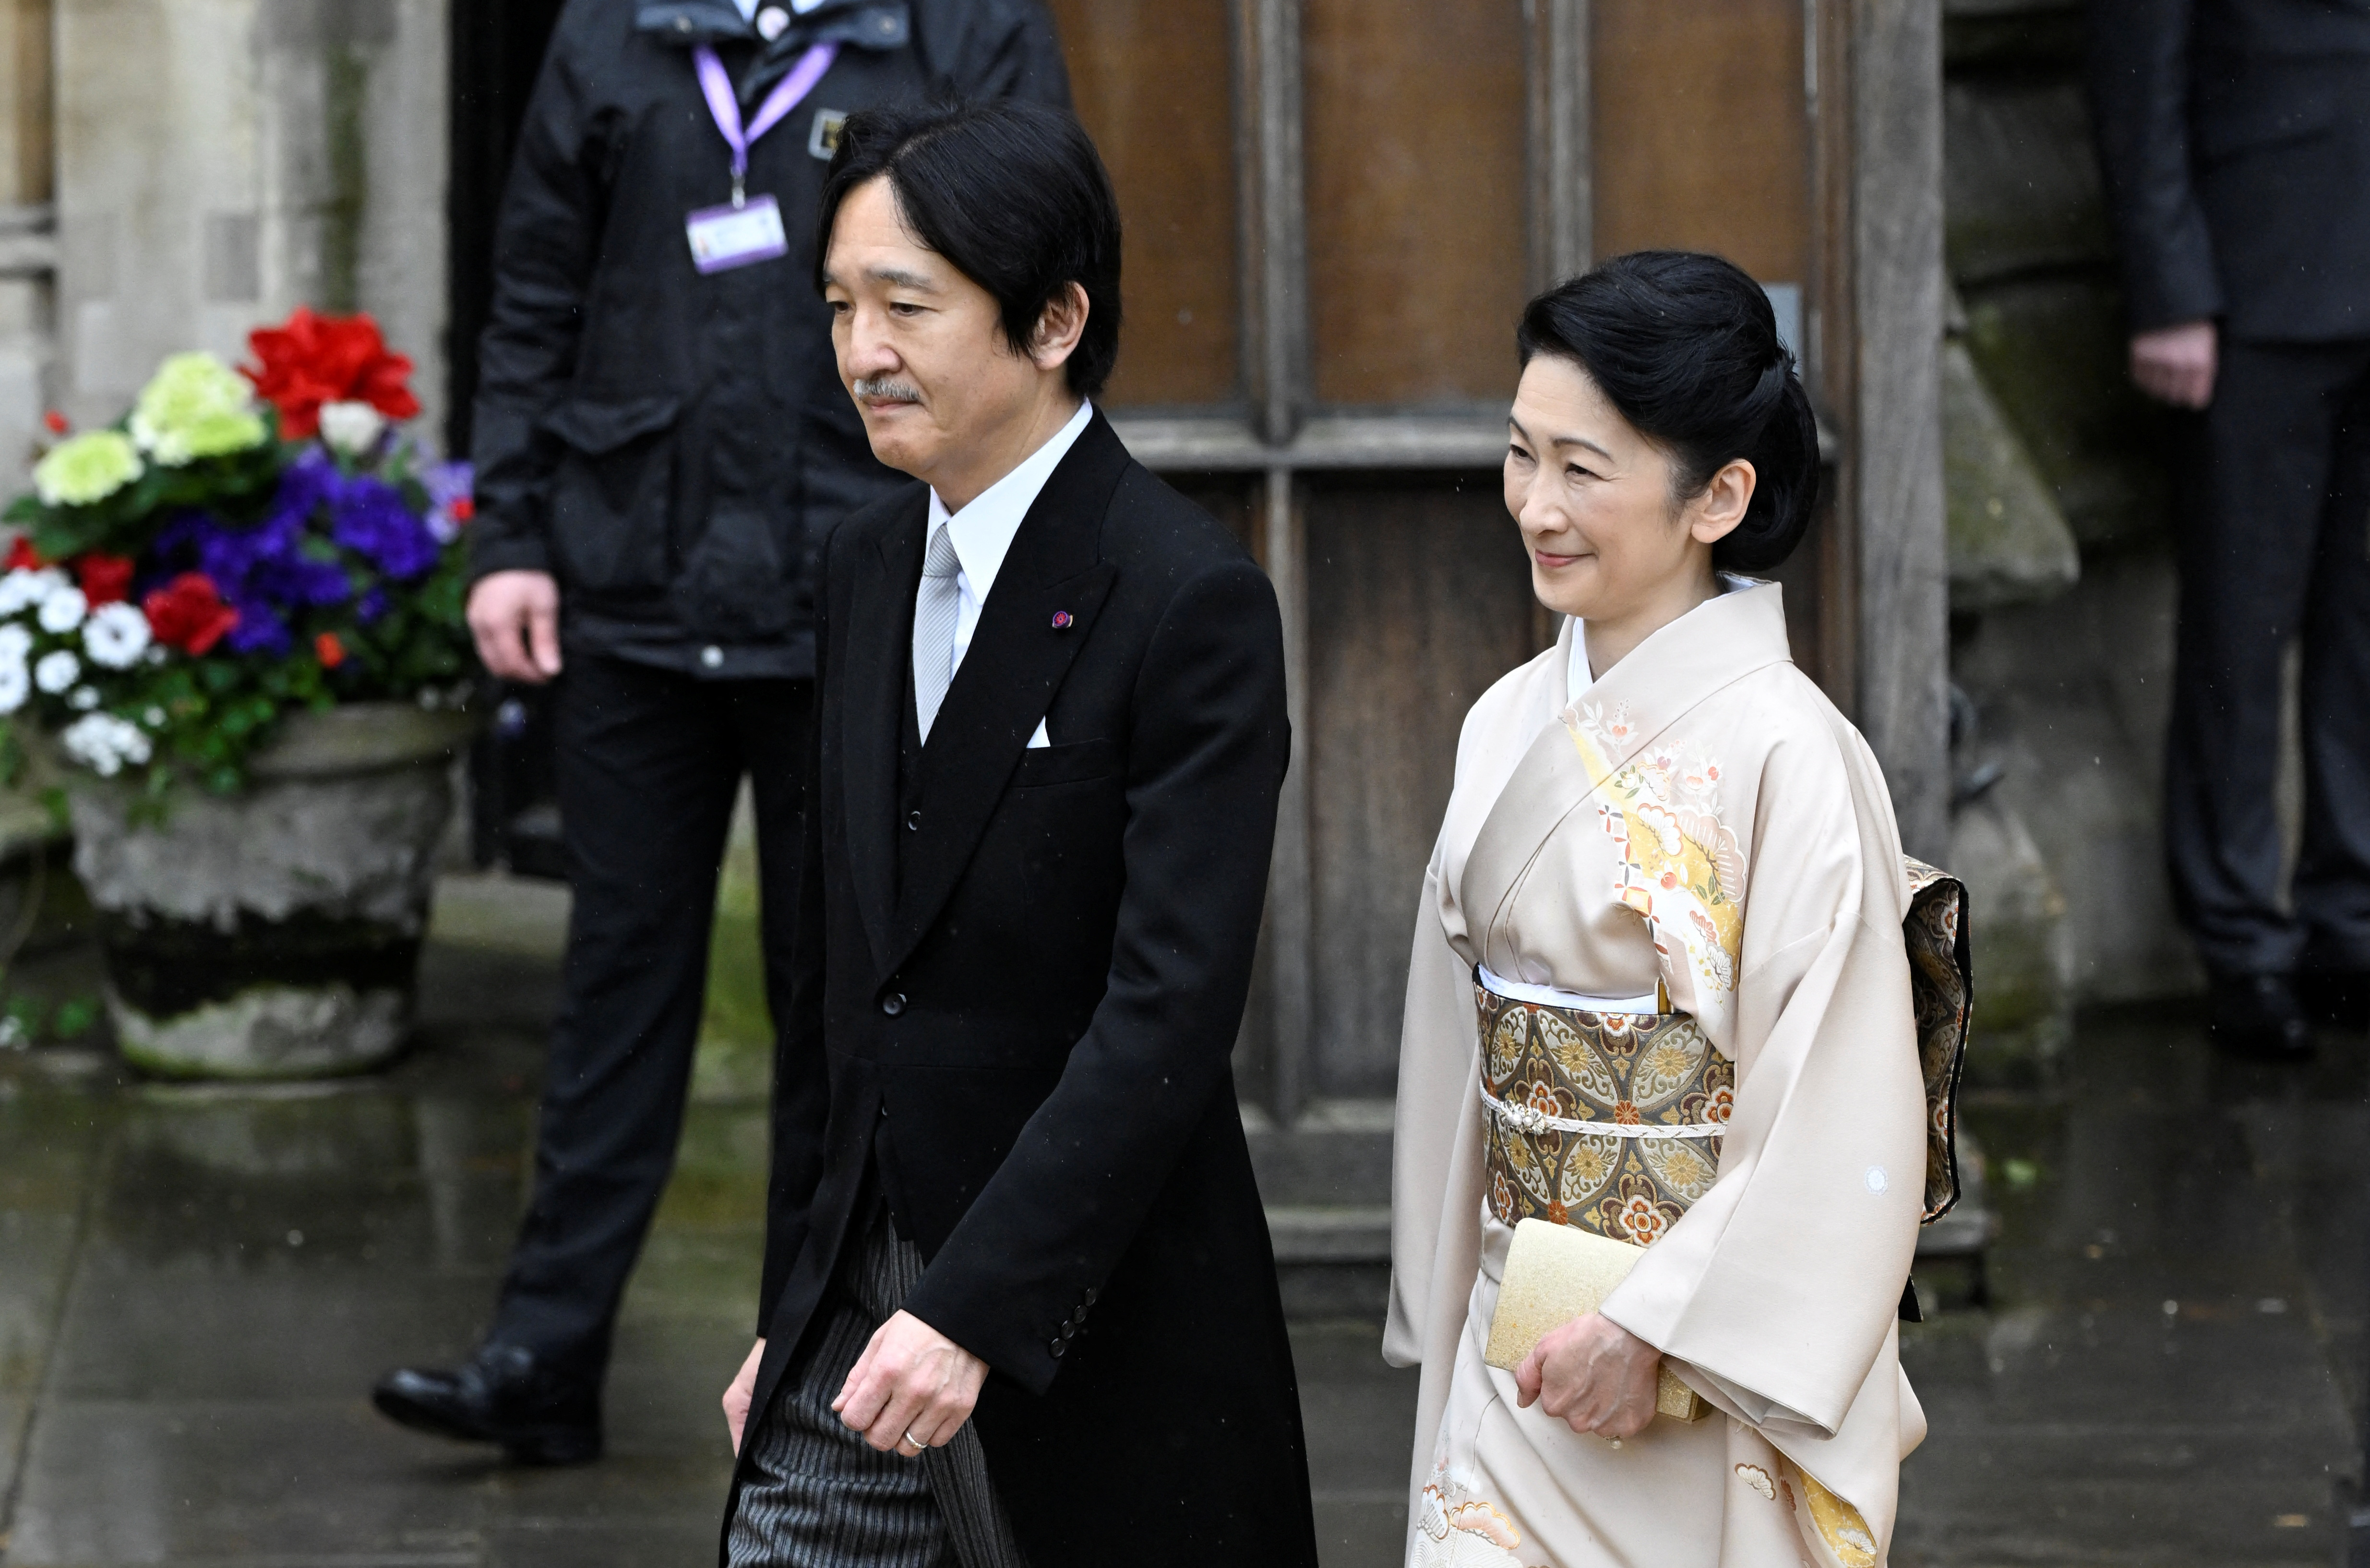 Crown Prince Fumihito of Japan and Crown Princess Kiko arrive to attend Britain's King Charles and Queen Camilla coronation ceremony at Westminster Abbey, in London, Britain May 6, 2023. REUTERS/Toby Melville/Pool